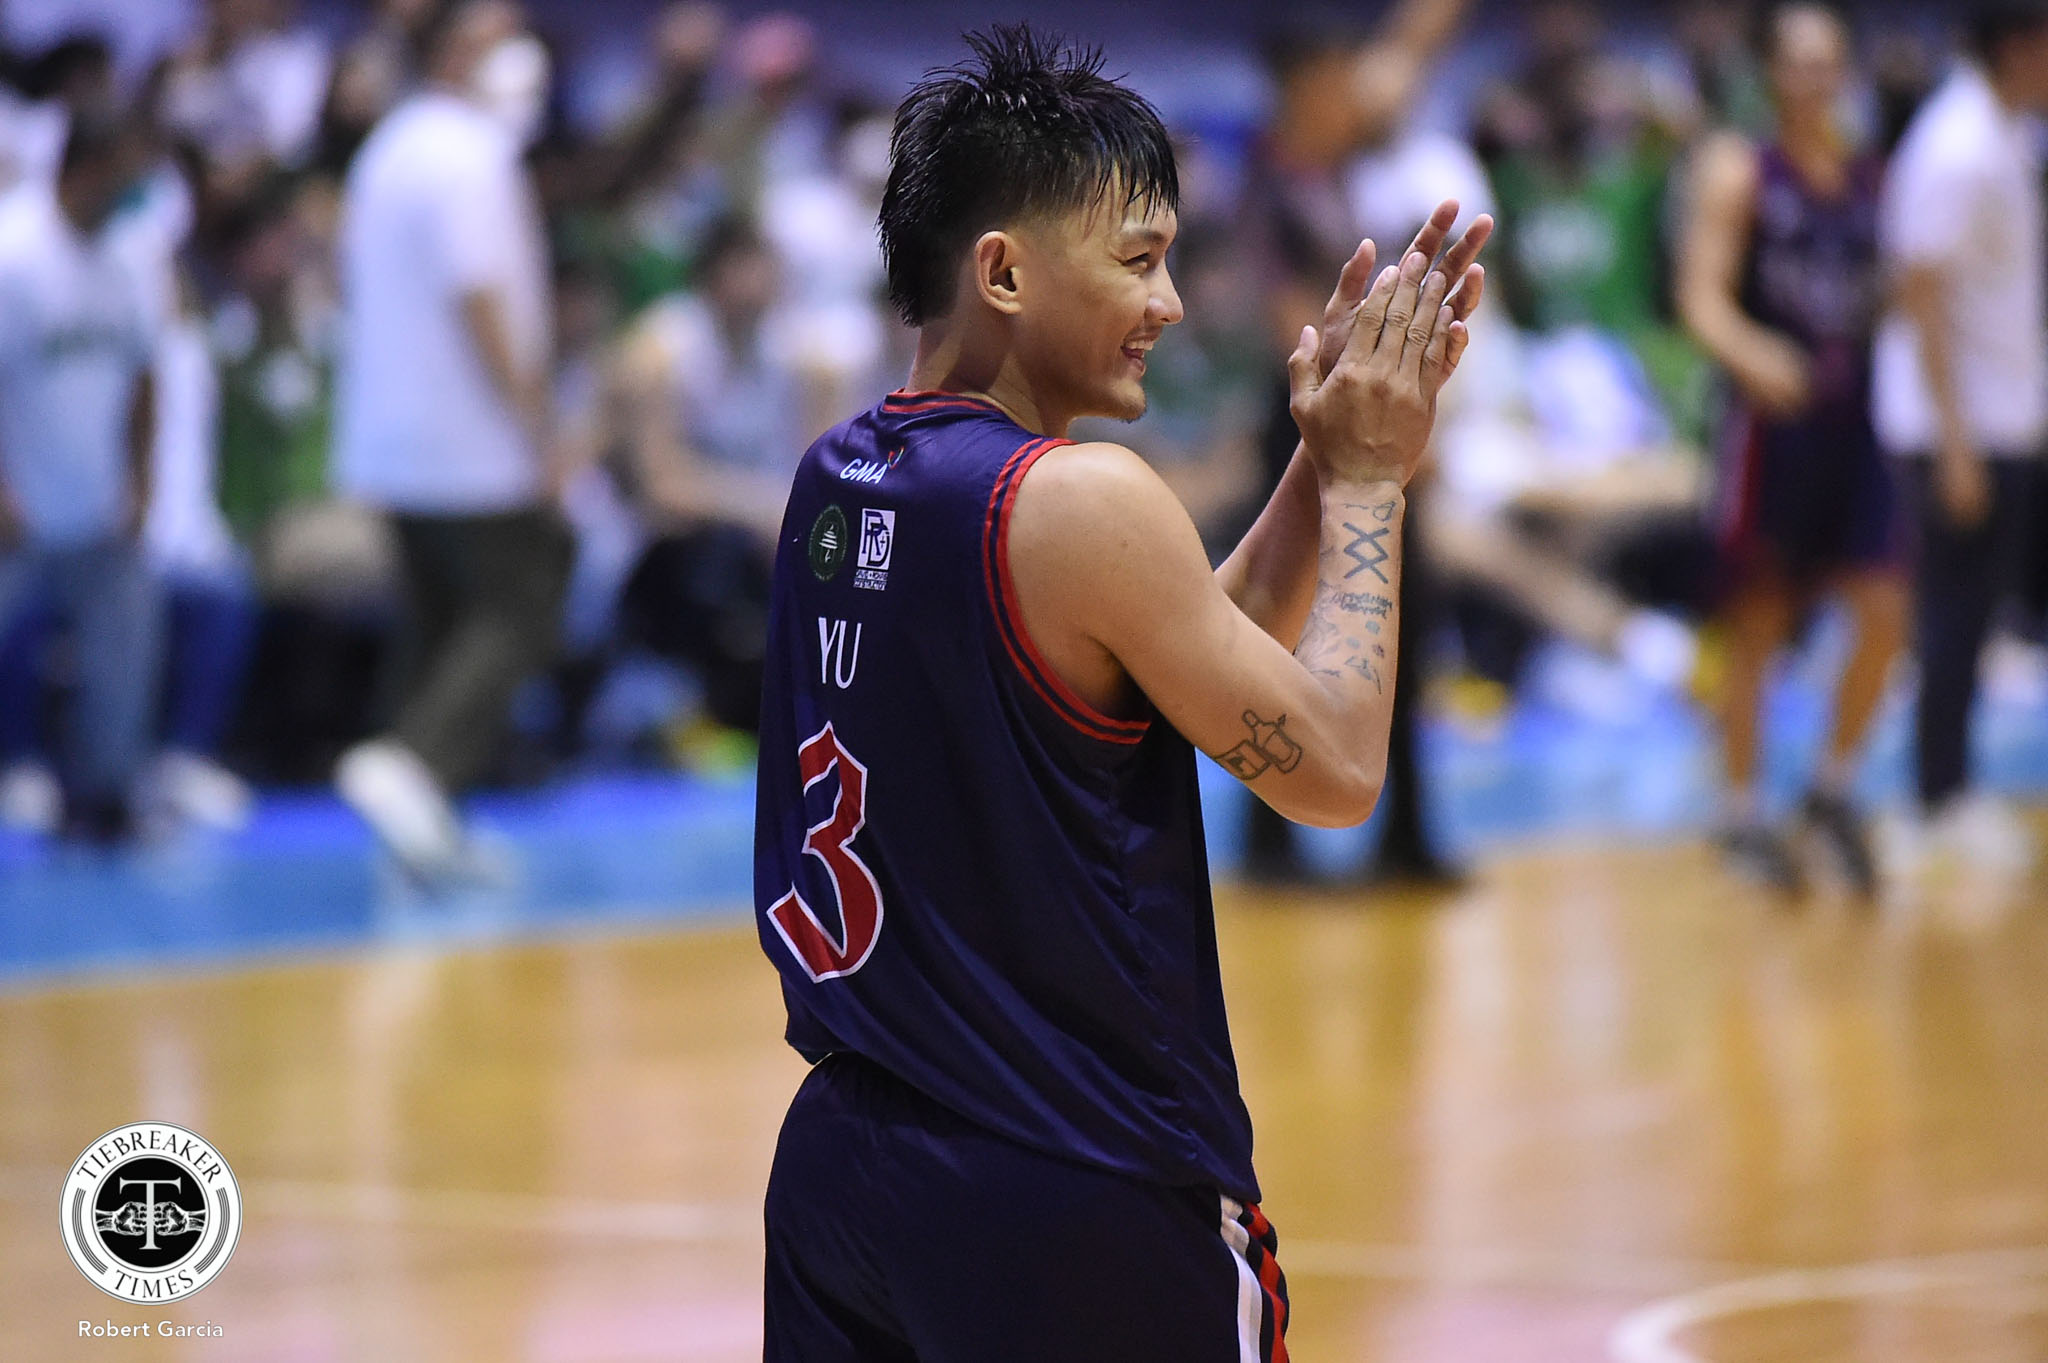 NCAA-98-CSB-vs-CSJL-Fran-Yu-2-1-1 Letran's championship experience over Benilde the difference in Game 1, says Bonnie Tan Basketball CSJL NCAA News  - philippine sports news